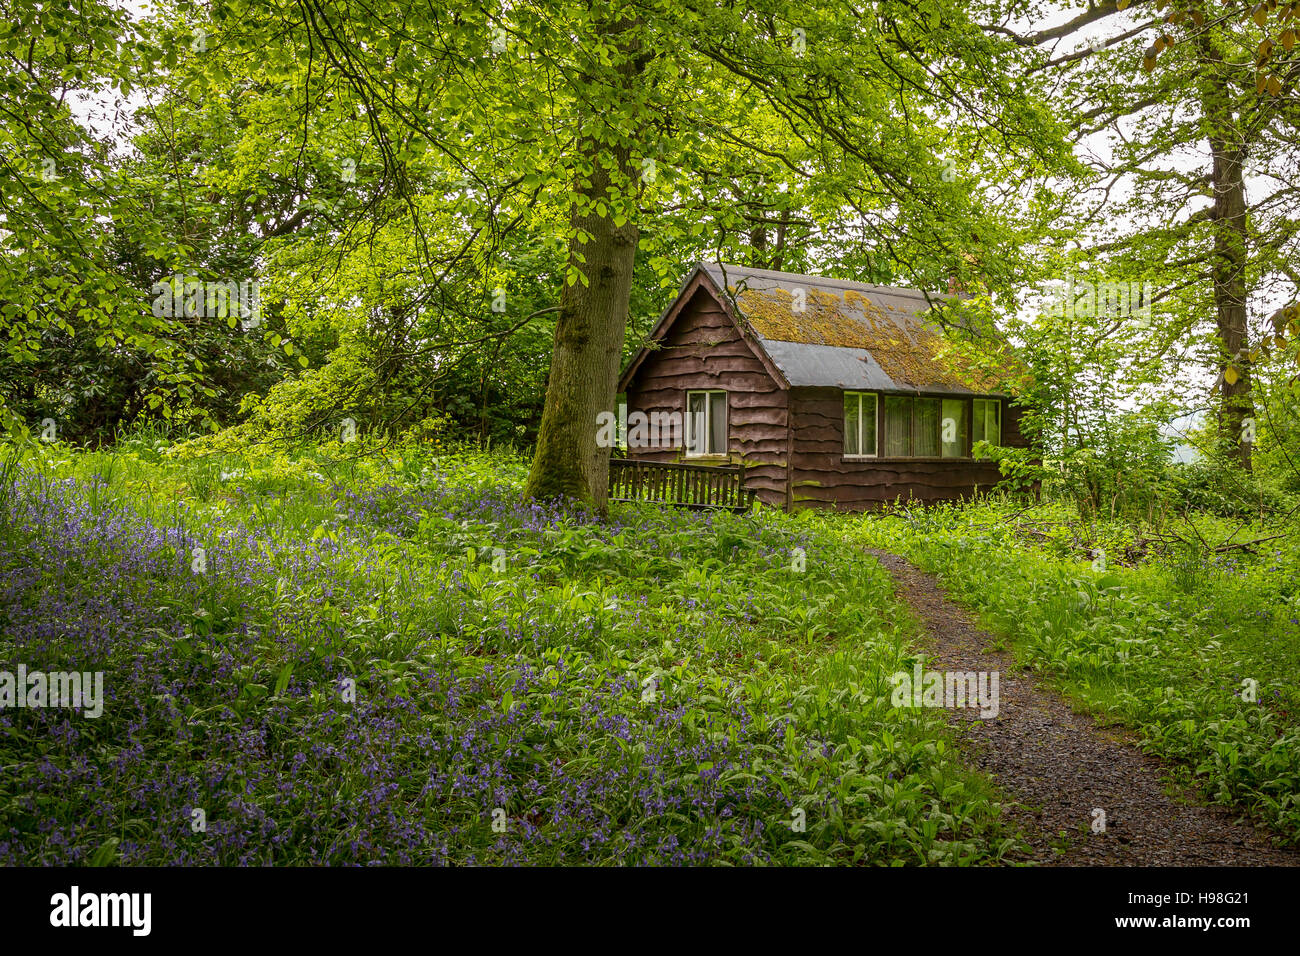 wooden hut in woods with blue bells Stock Photo